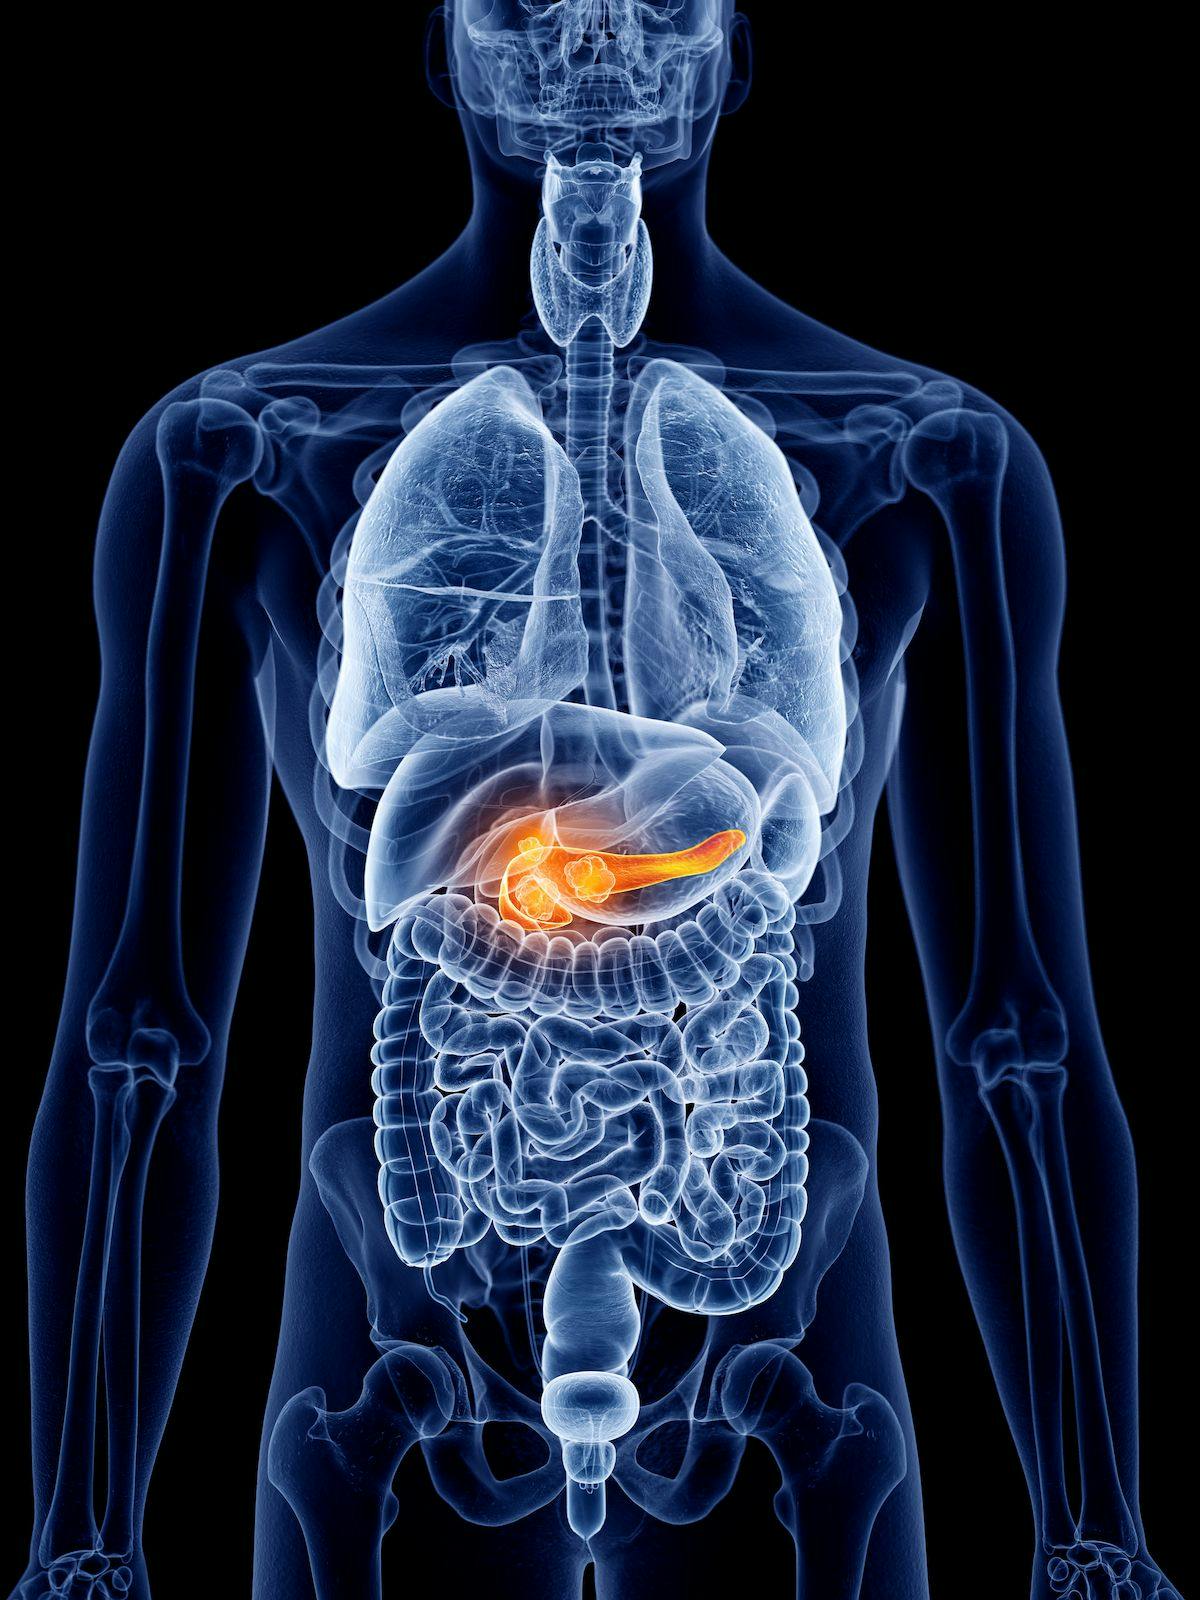 Patients with pancreatic cancer may benefit from treatment with ATG-101, which was granted orphan drug designation by the FDA.